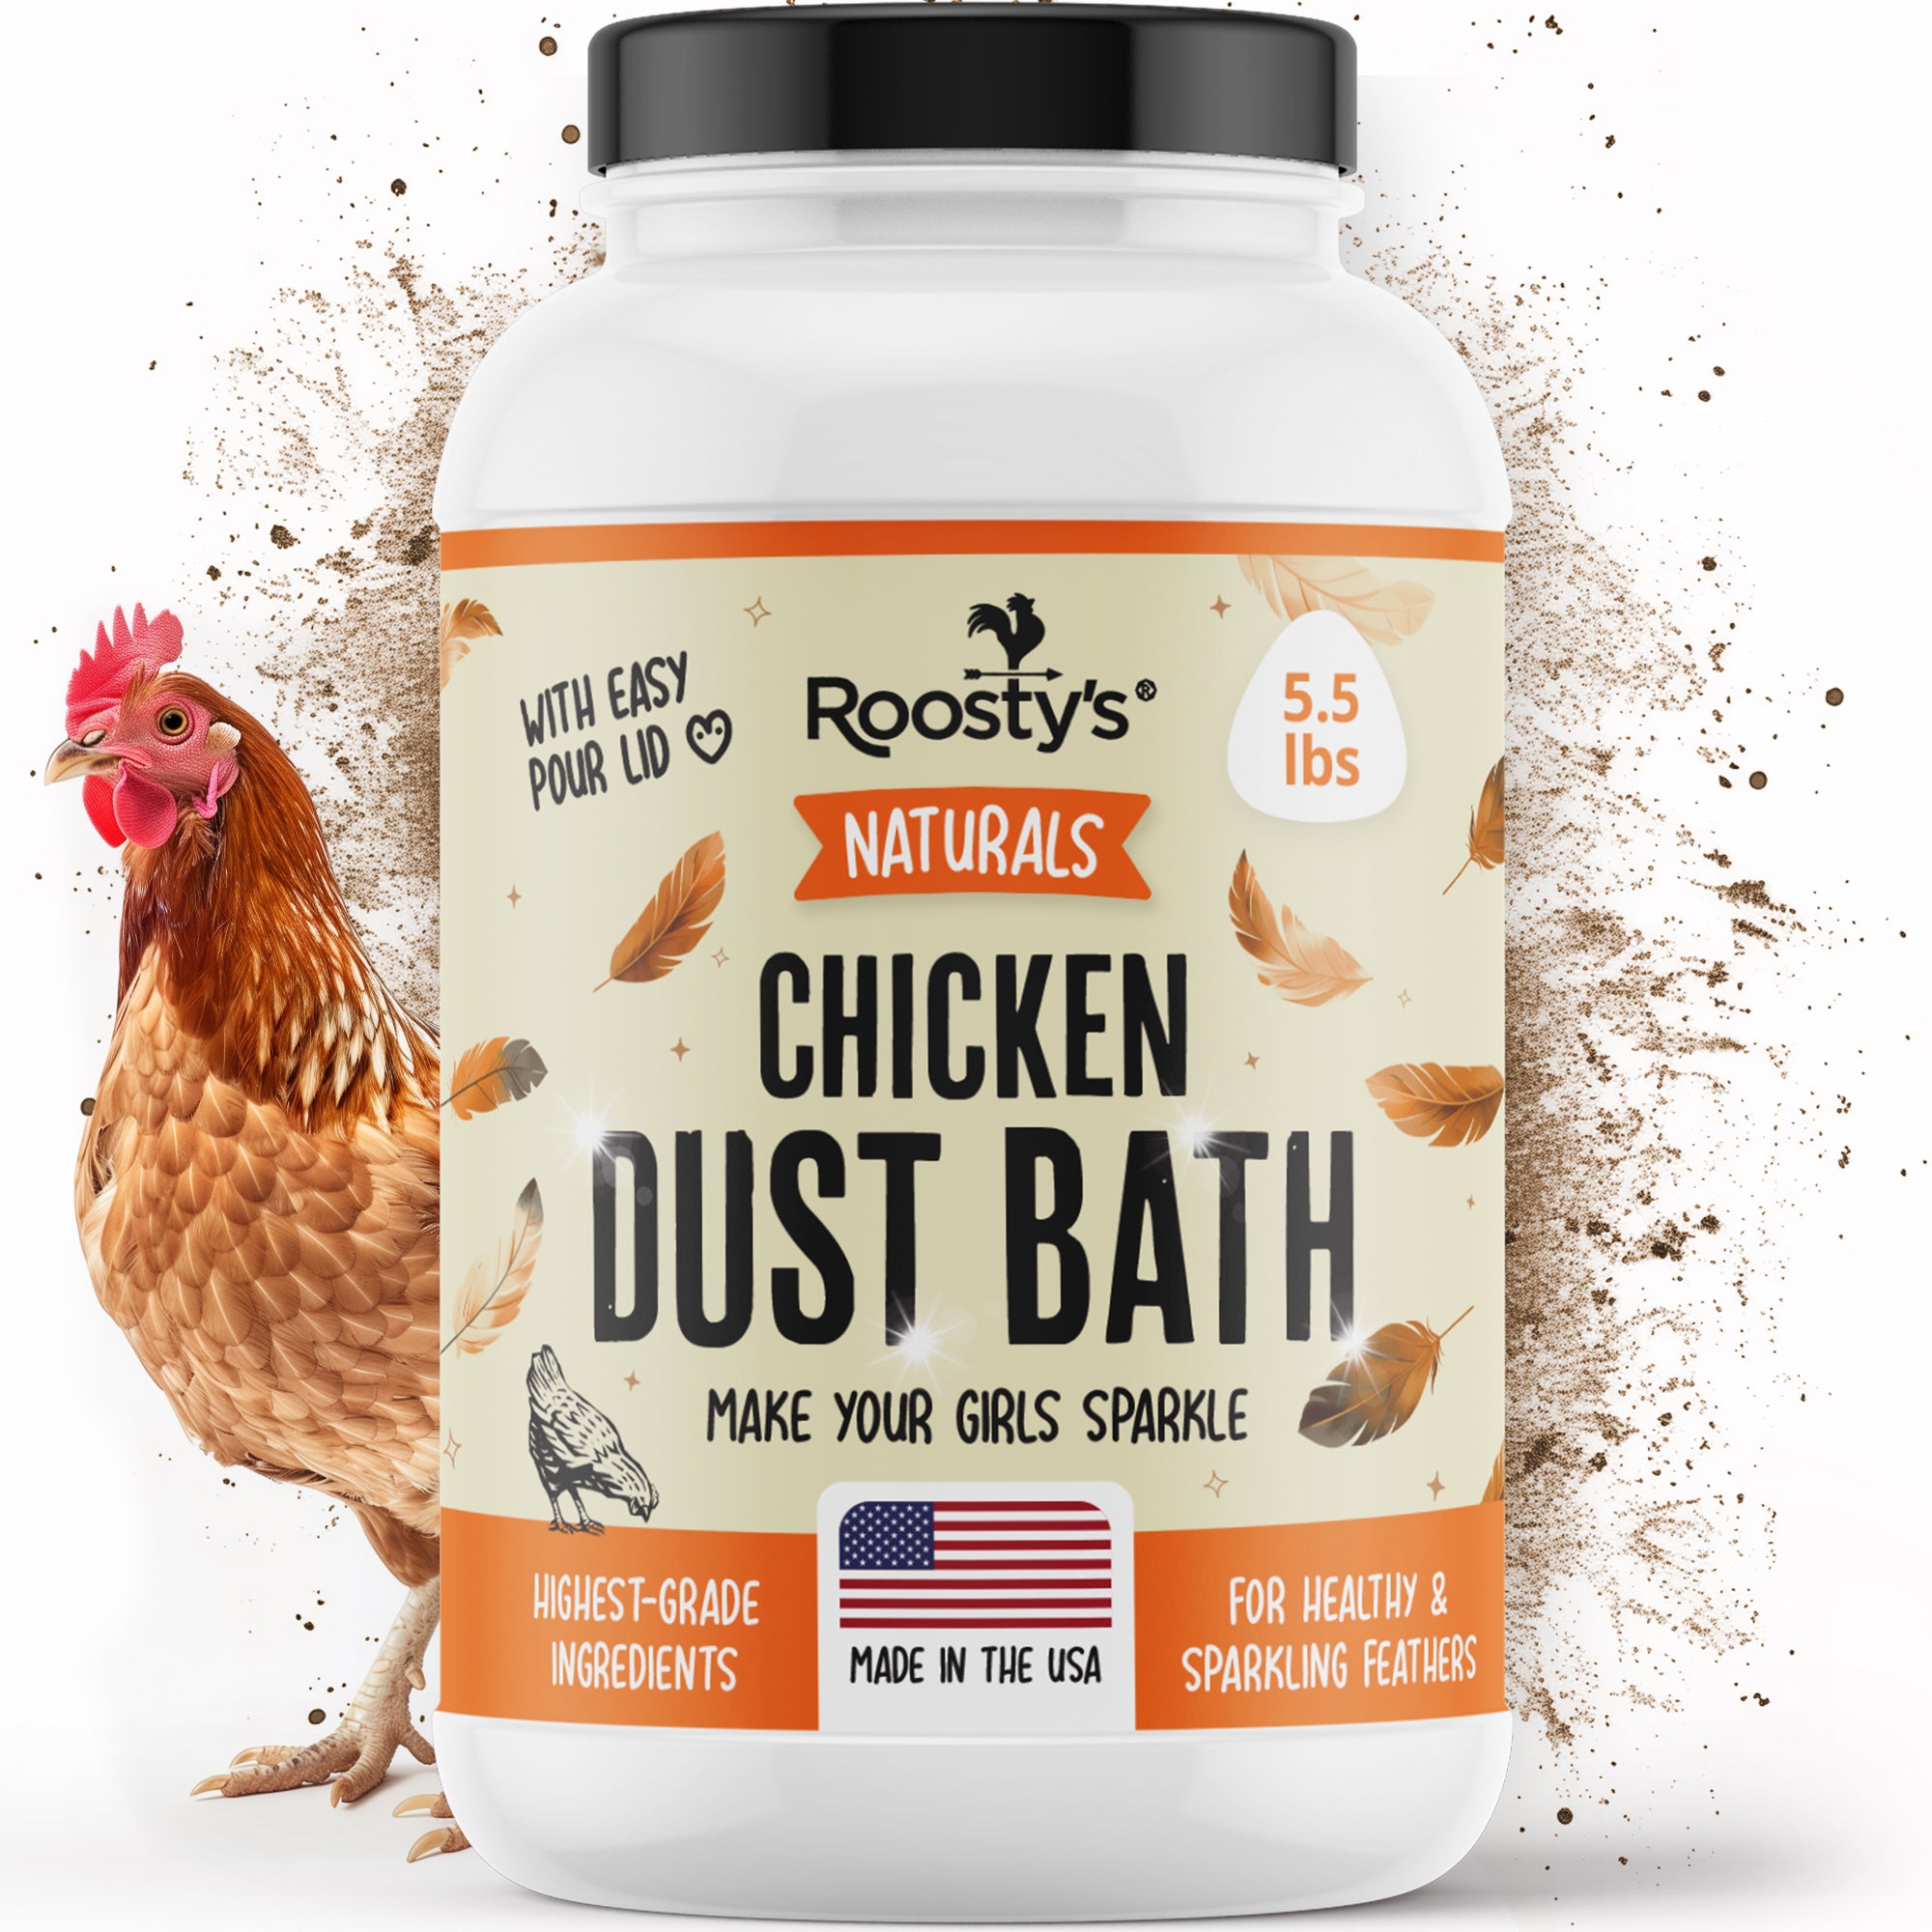 Roosty's Naturals - Dust Bath 5.5LB | Made in the USA